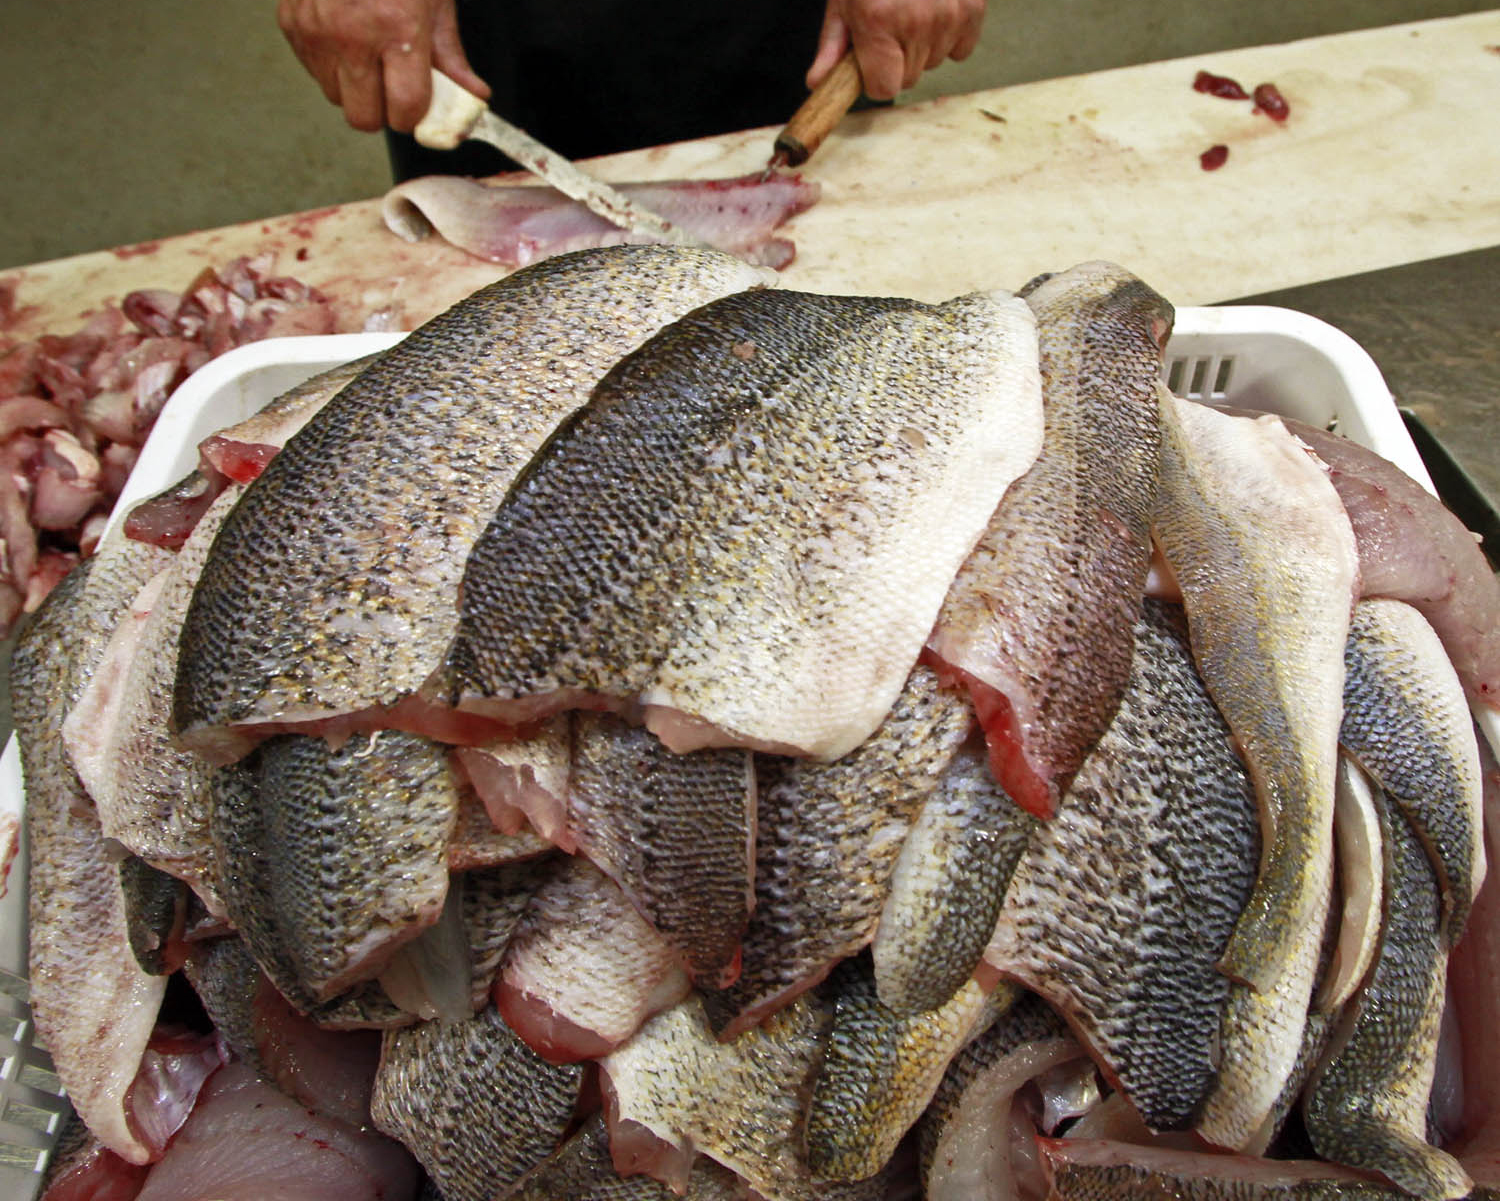 A commercial walleye processor fillets fish.